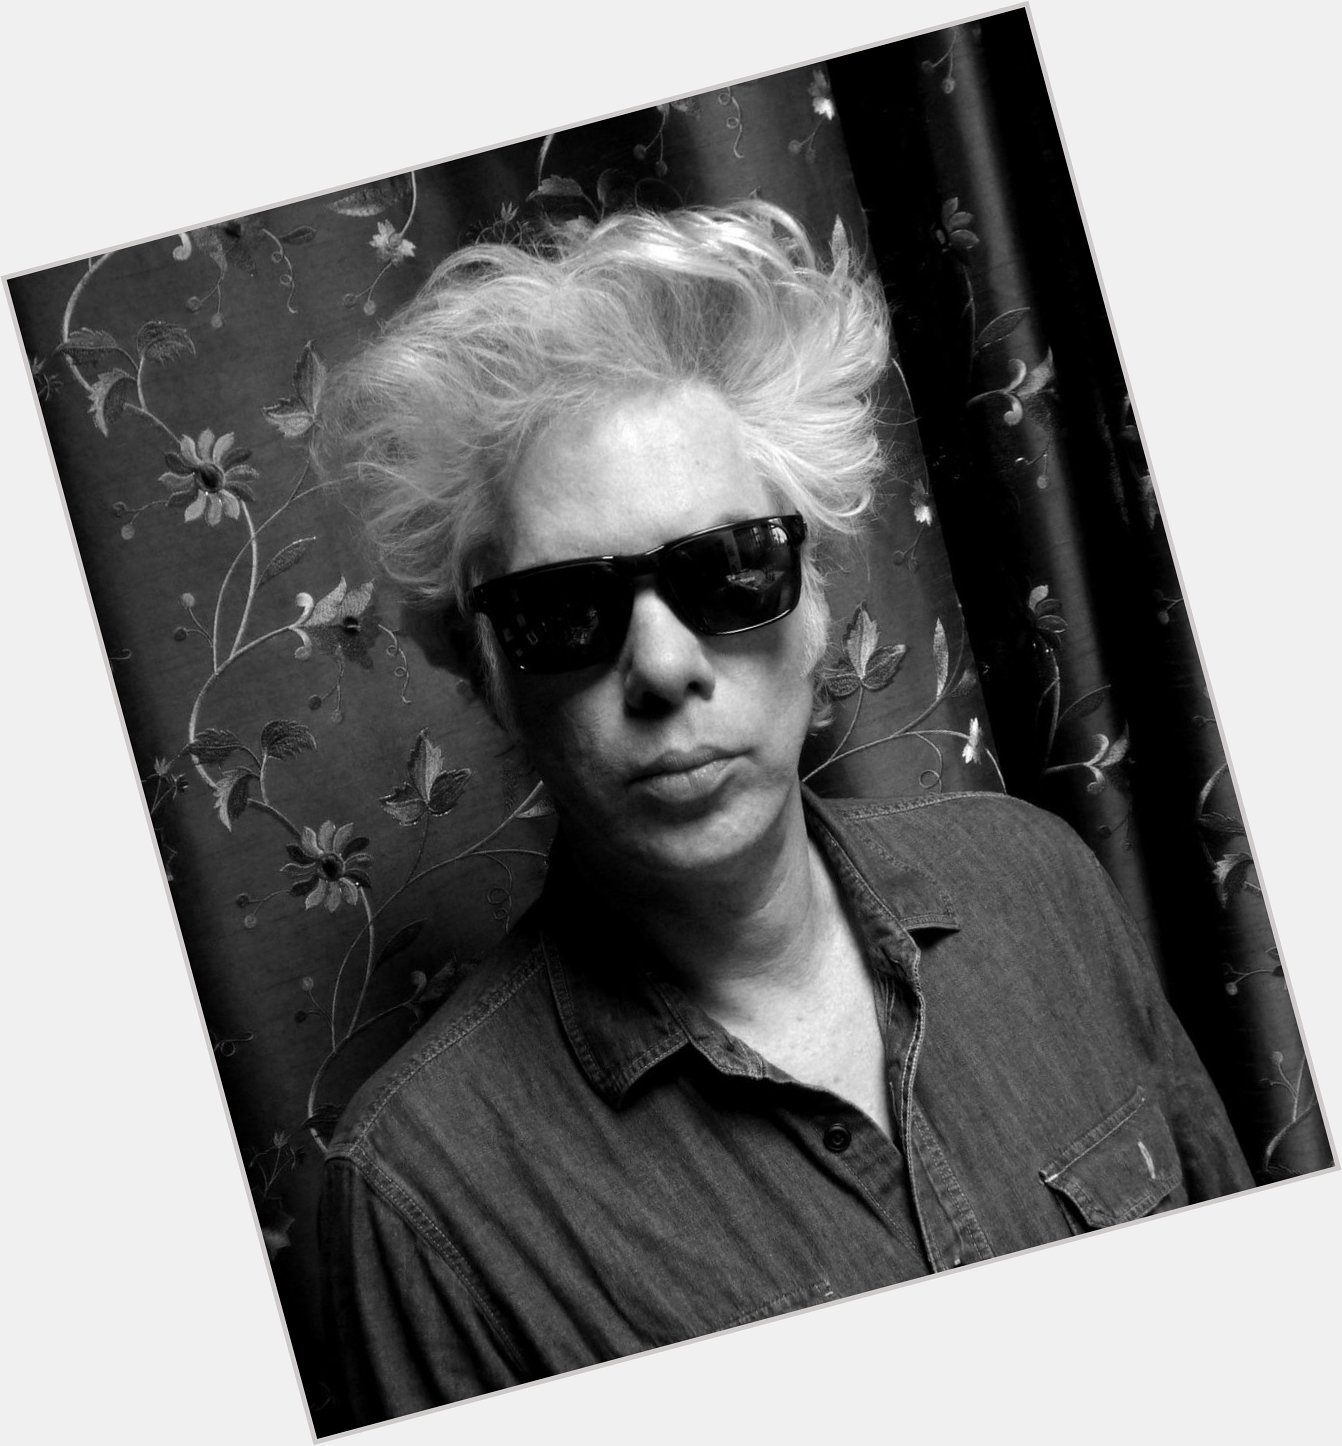 Happy 68th Birthday Jim Jarmusch! 

One of my personal favourite directors of all time. 